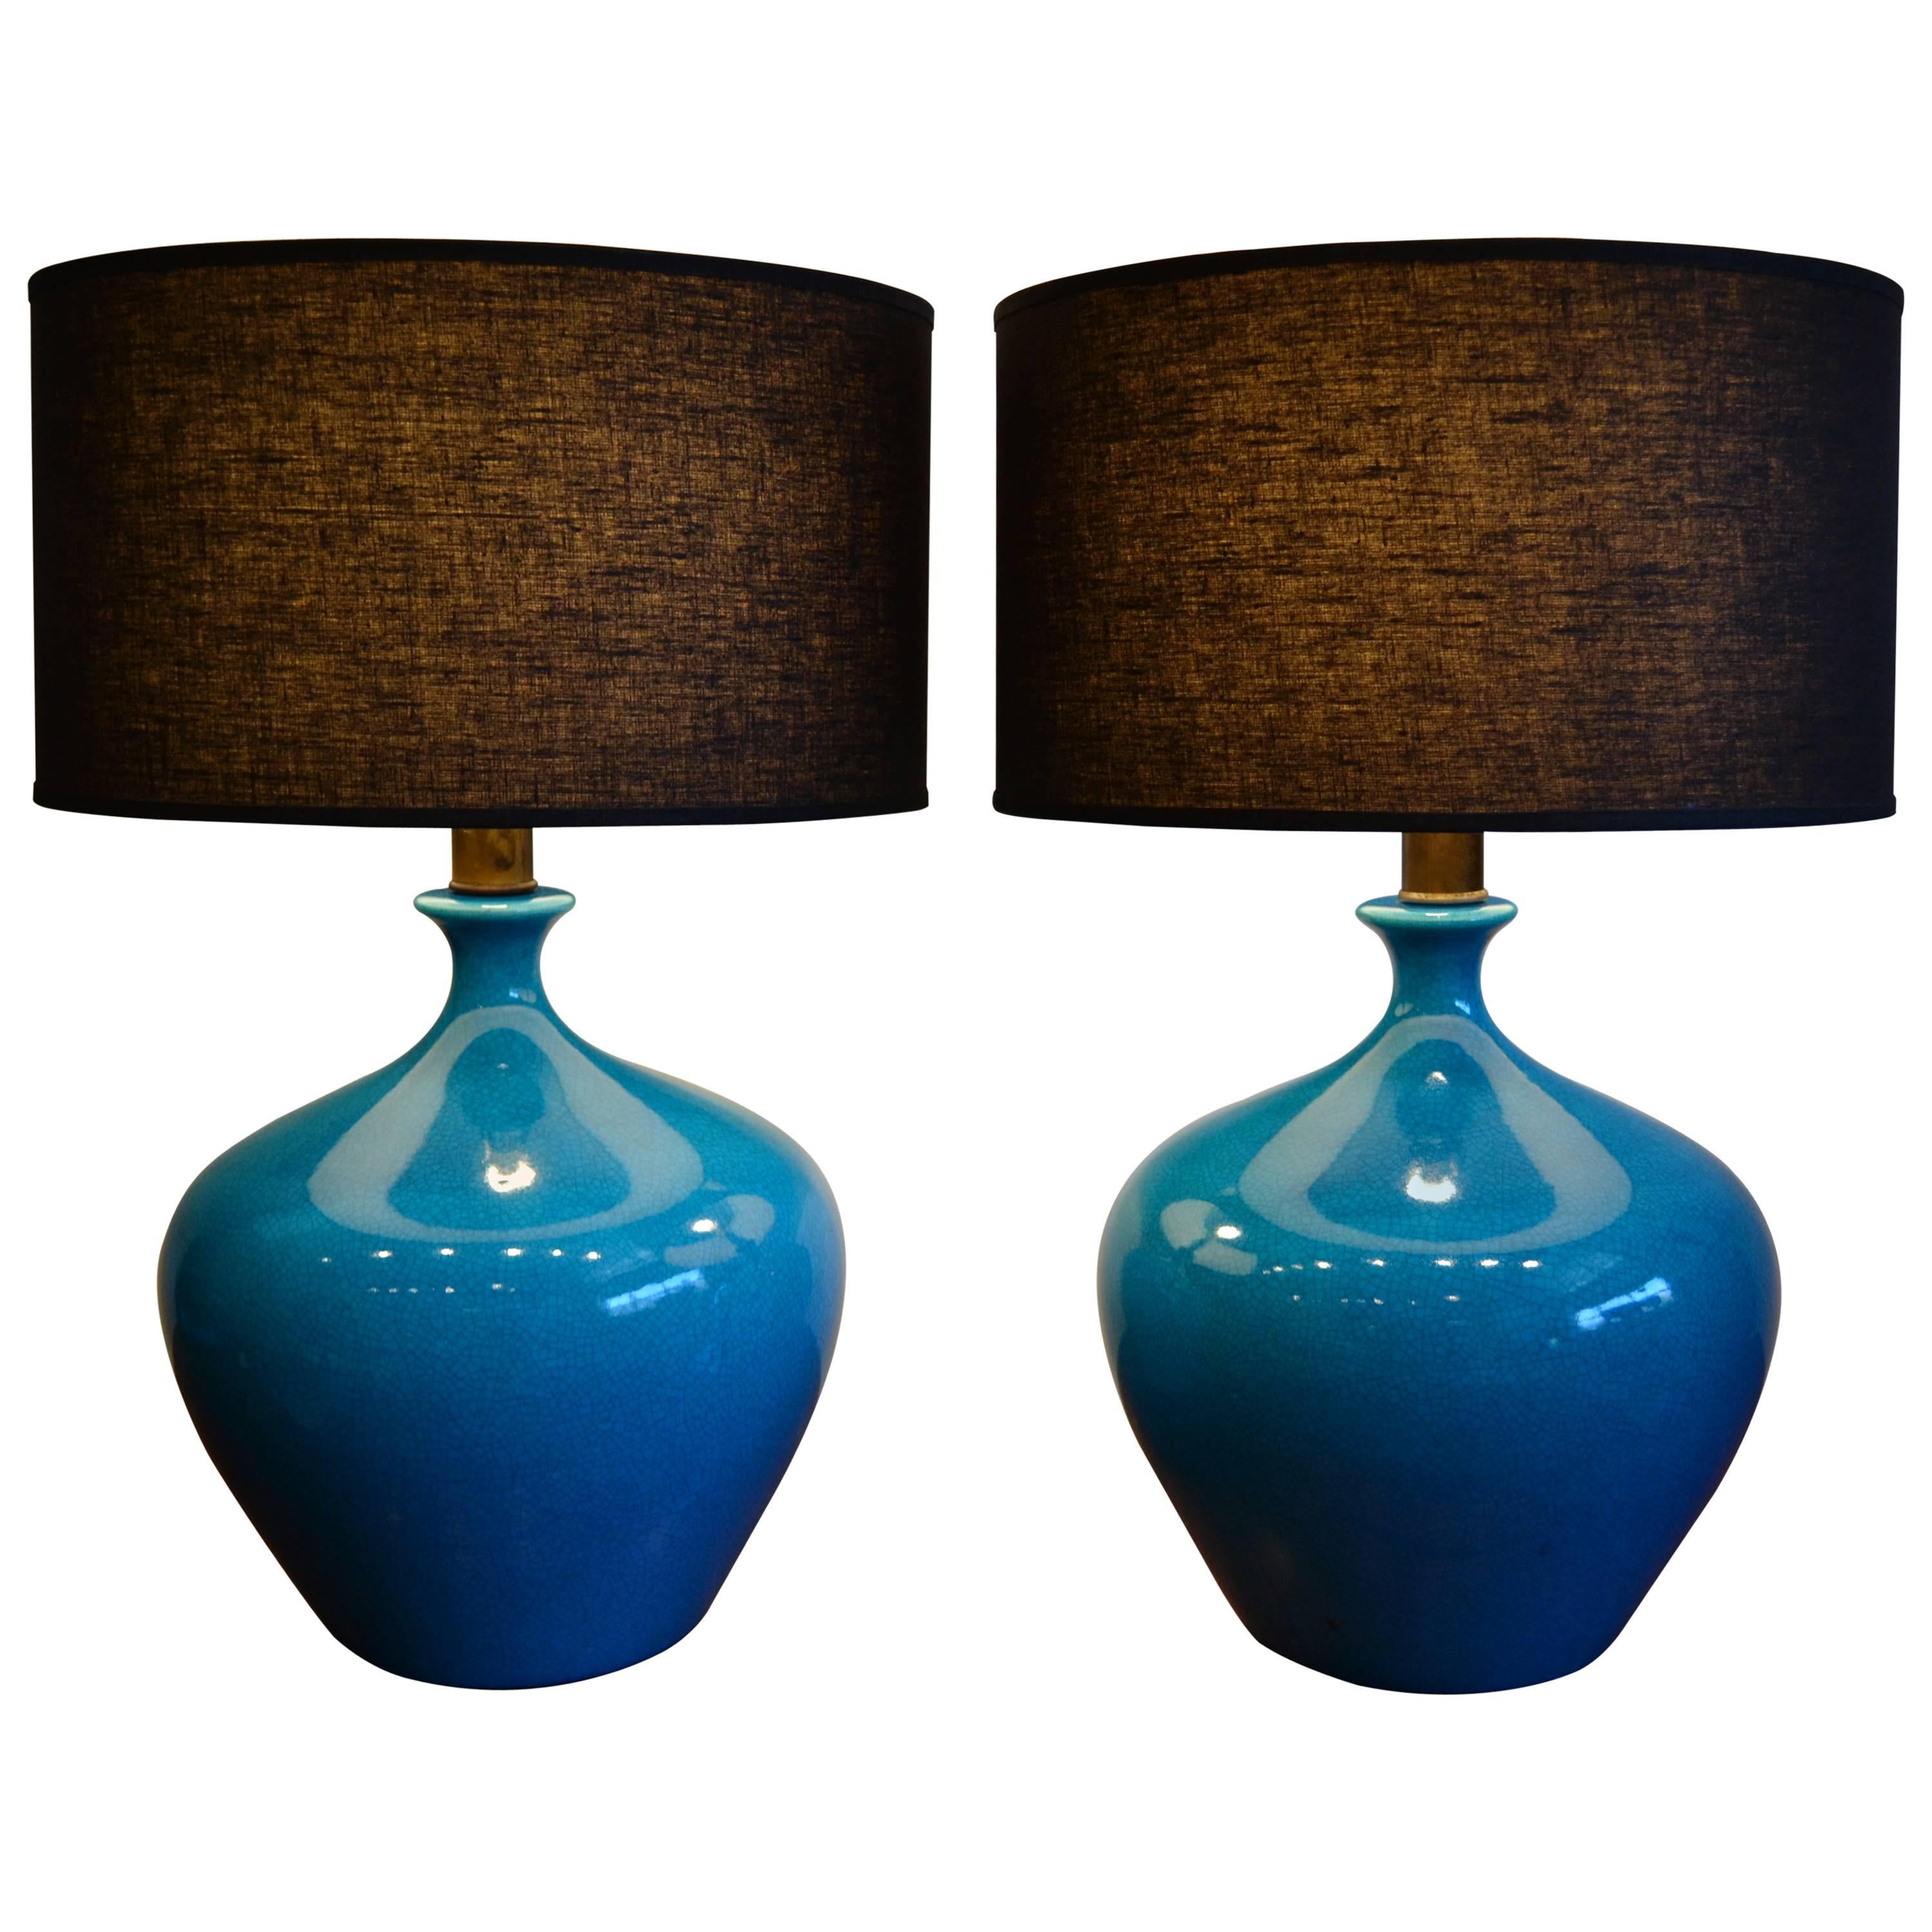 Exceptional Pair of Blue Ceramic Crackle Glaze Table Lamps, 1950s